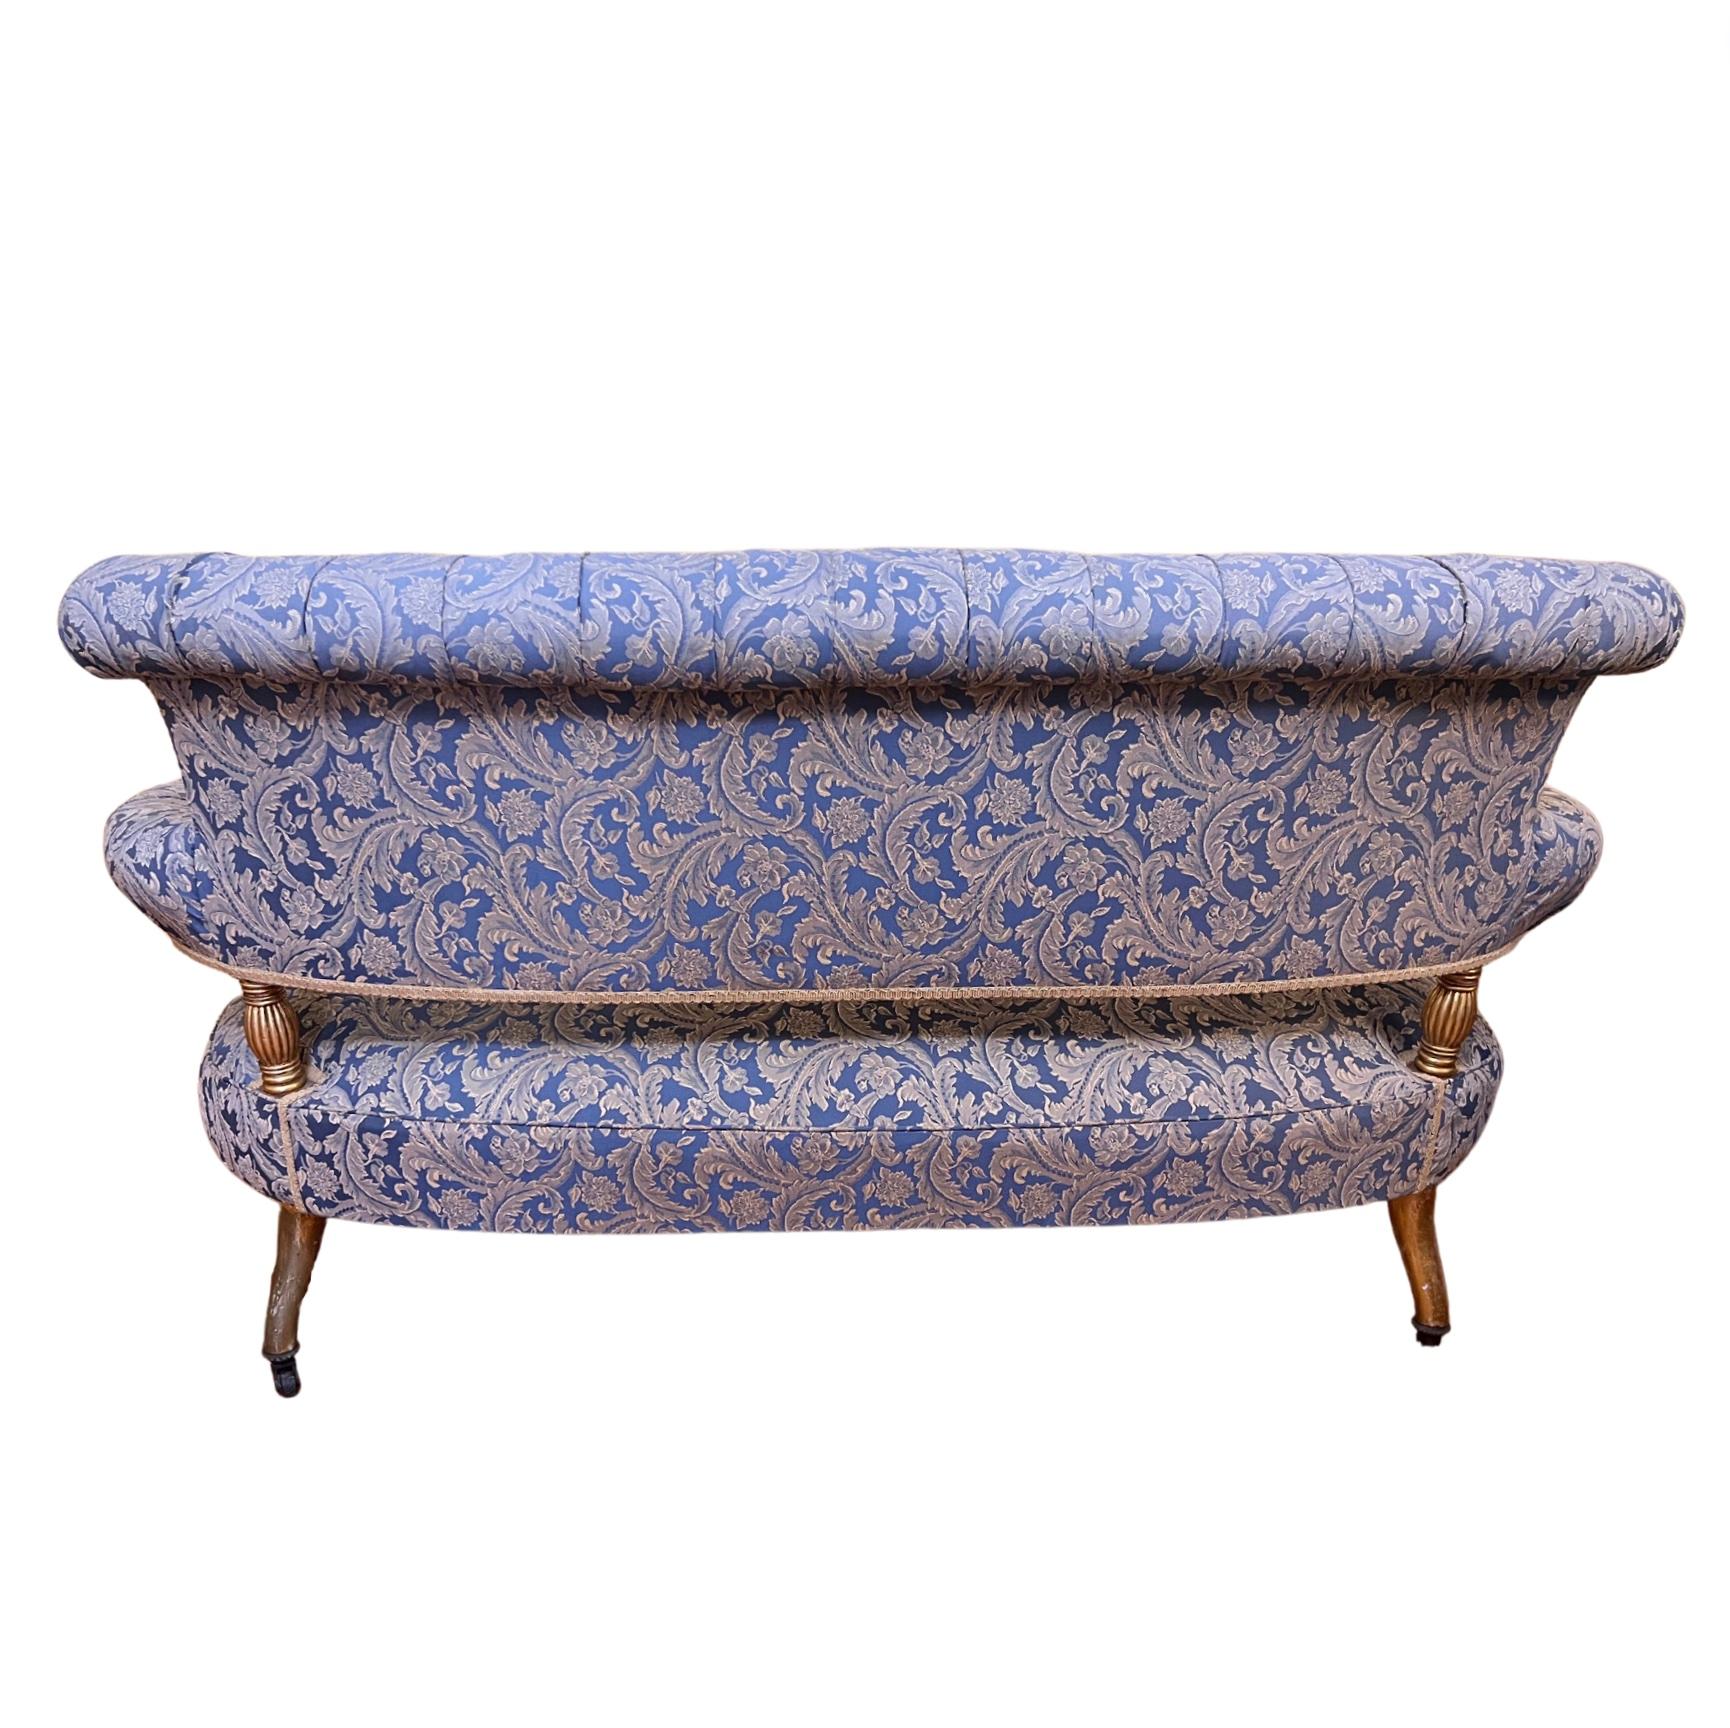 Button back blue cream brocade fabric, spring seat, padded armrests, carved detail on arm rest fronts, very elegant piece of furniture to add to your home, office or salon, all legs have original castors

Circa: 1880

Material: gold gilt and